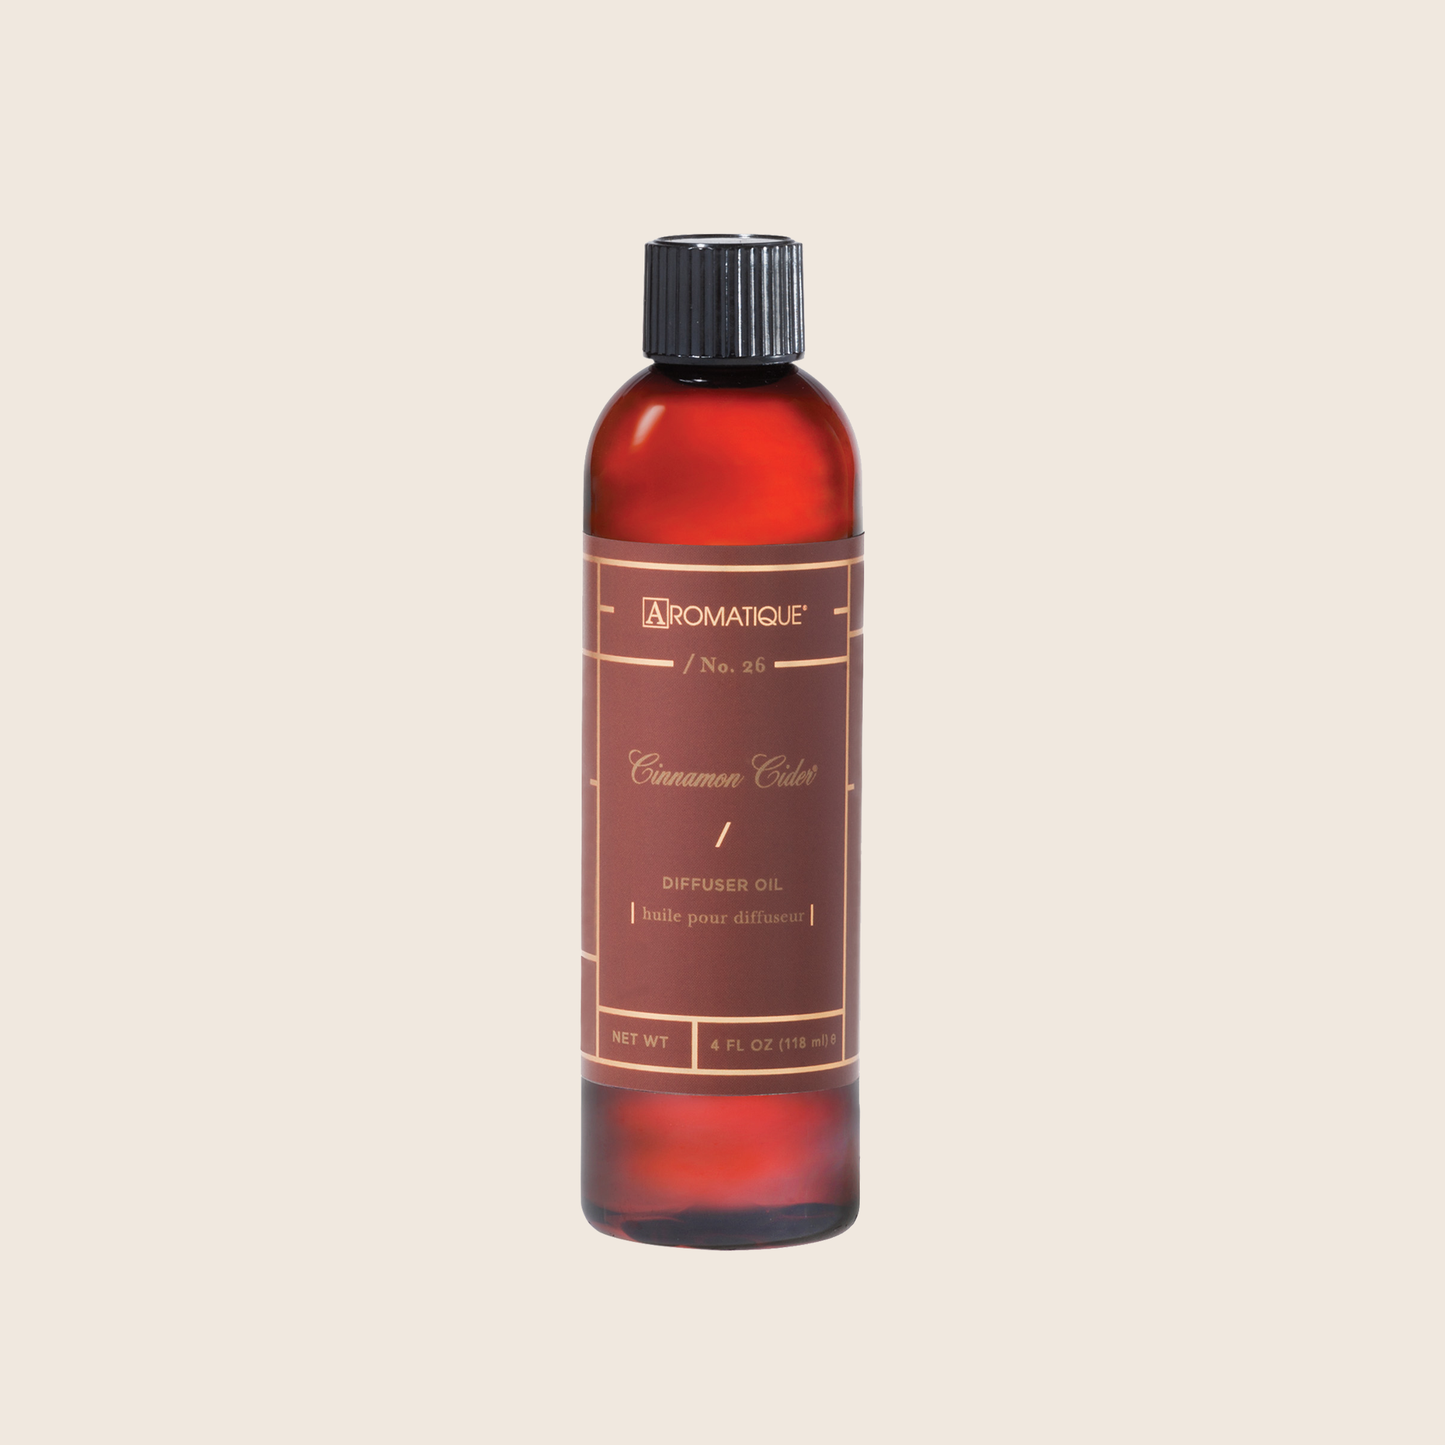  Rouge Diffuser Oil, Ambroxan Molecule-Based Scent